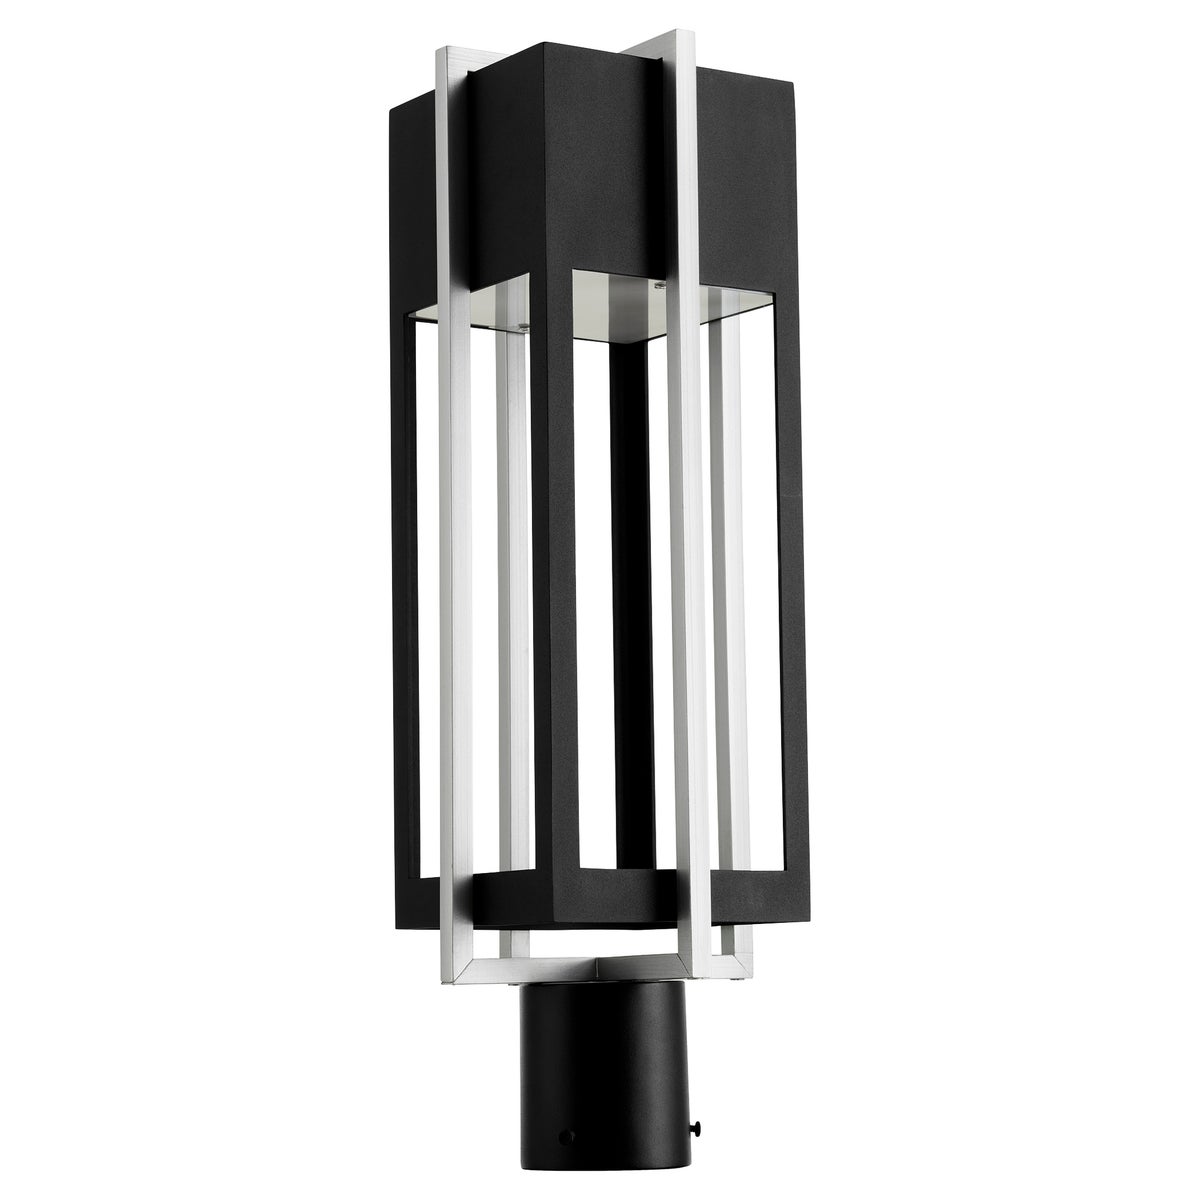 LED Outdoor Post Light with a unique geometric design, featuring a dual-layered frame in a two-toned noir/satin nickel finish. Provides guiding light for guests in contemporary outdoor settings. 7"W x 21.63"H. 11W LED, 465 lumens, 3000K color temperature. UL Listed for wet locations. 2-year warranty.